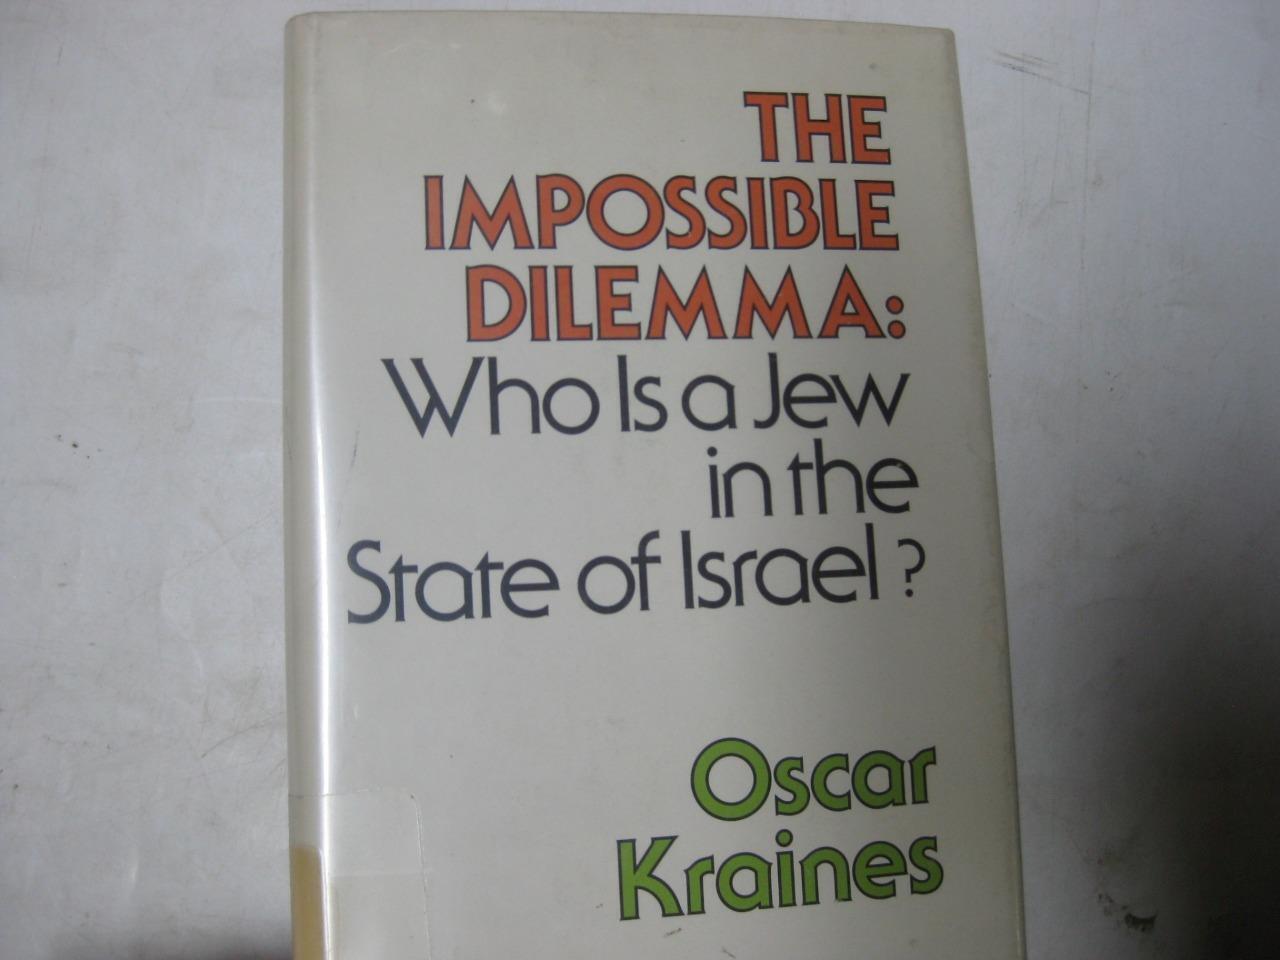 impossible dilemma: Who is a Jew in the State of Israel? by Oscar Kraines